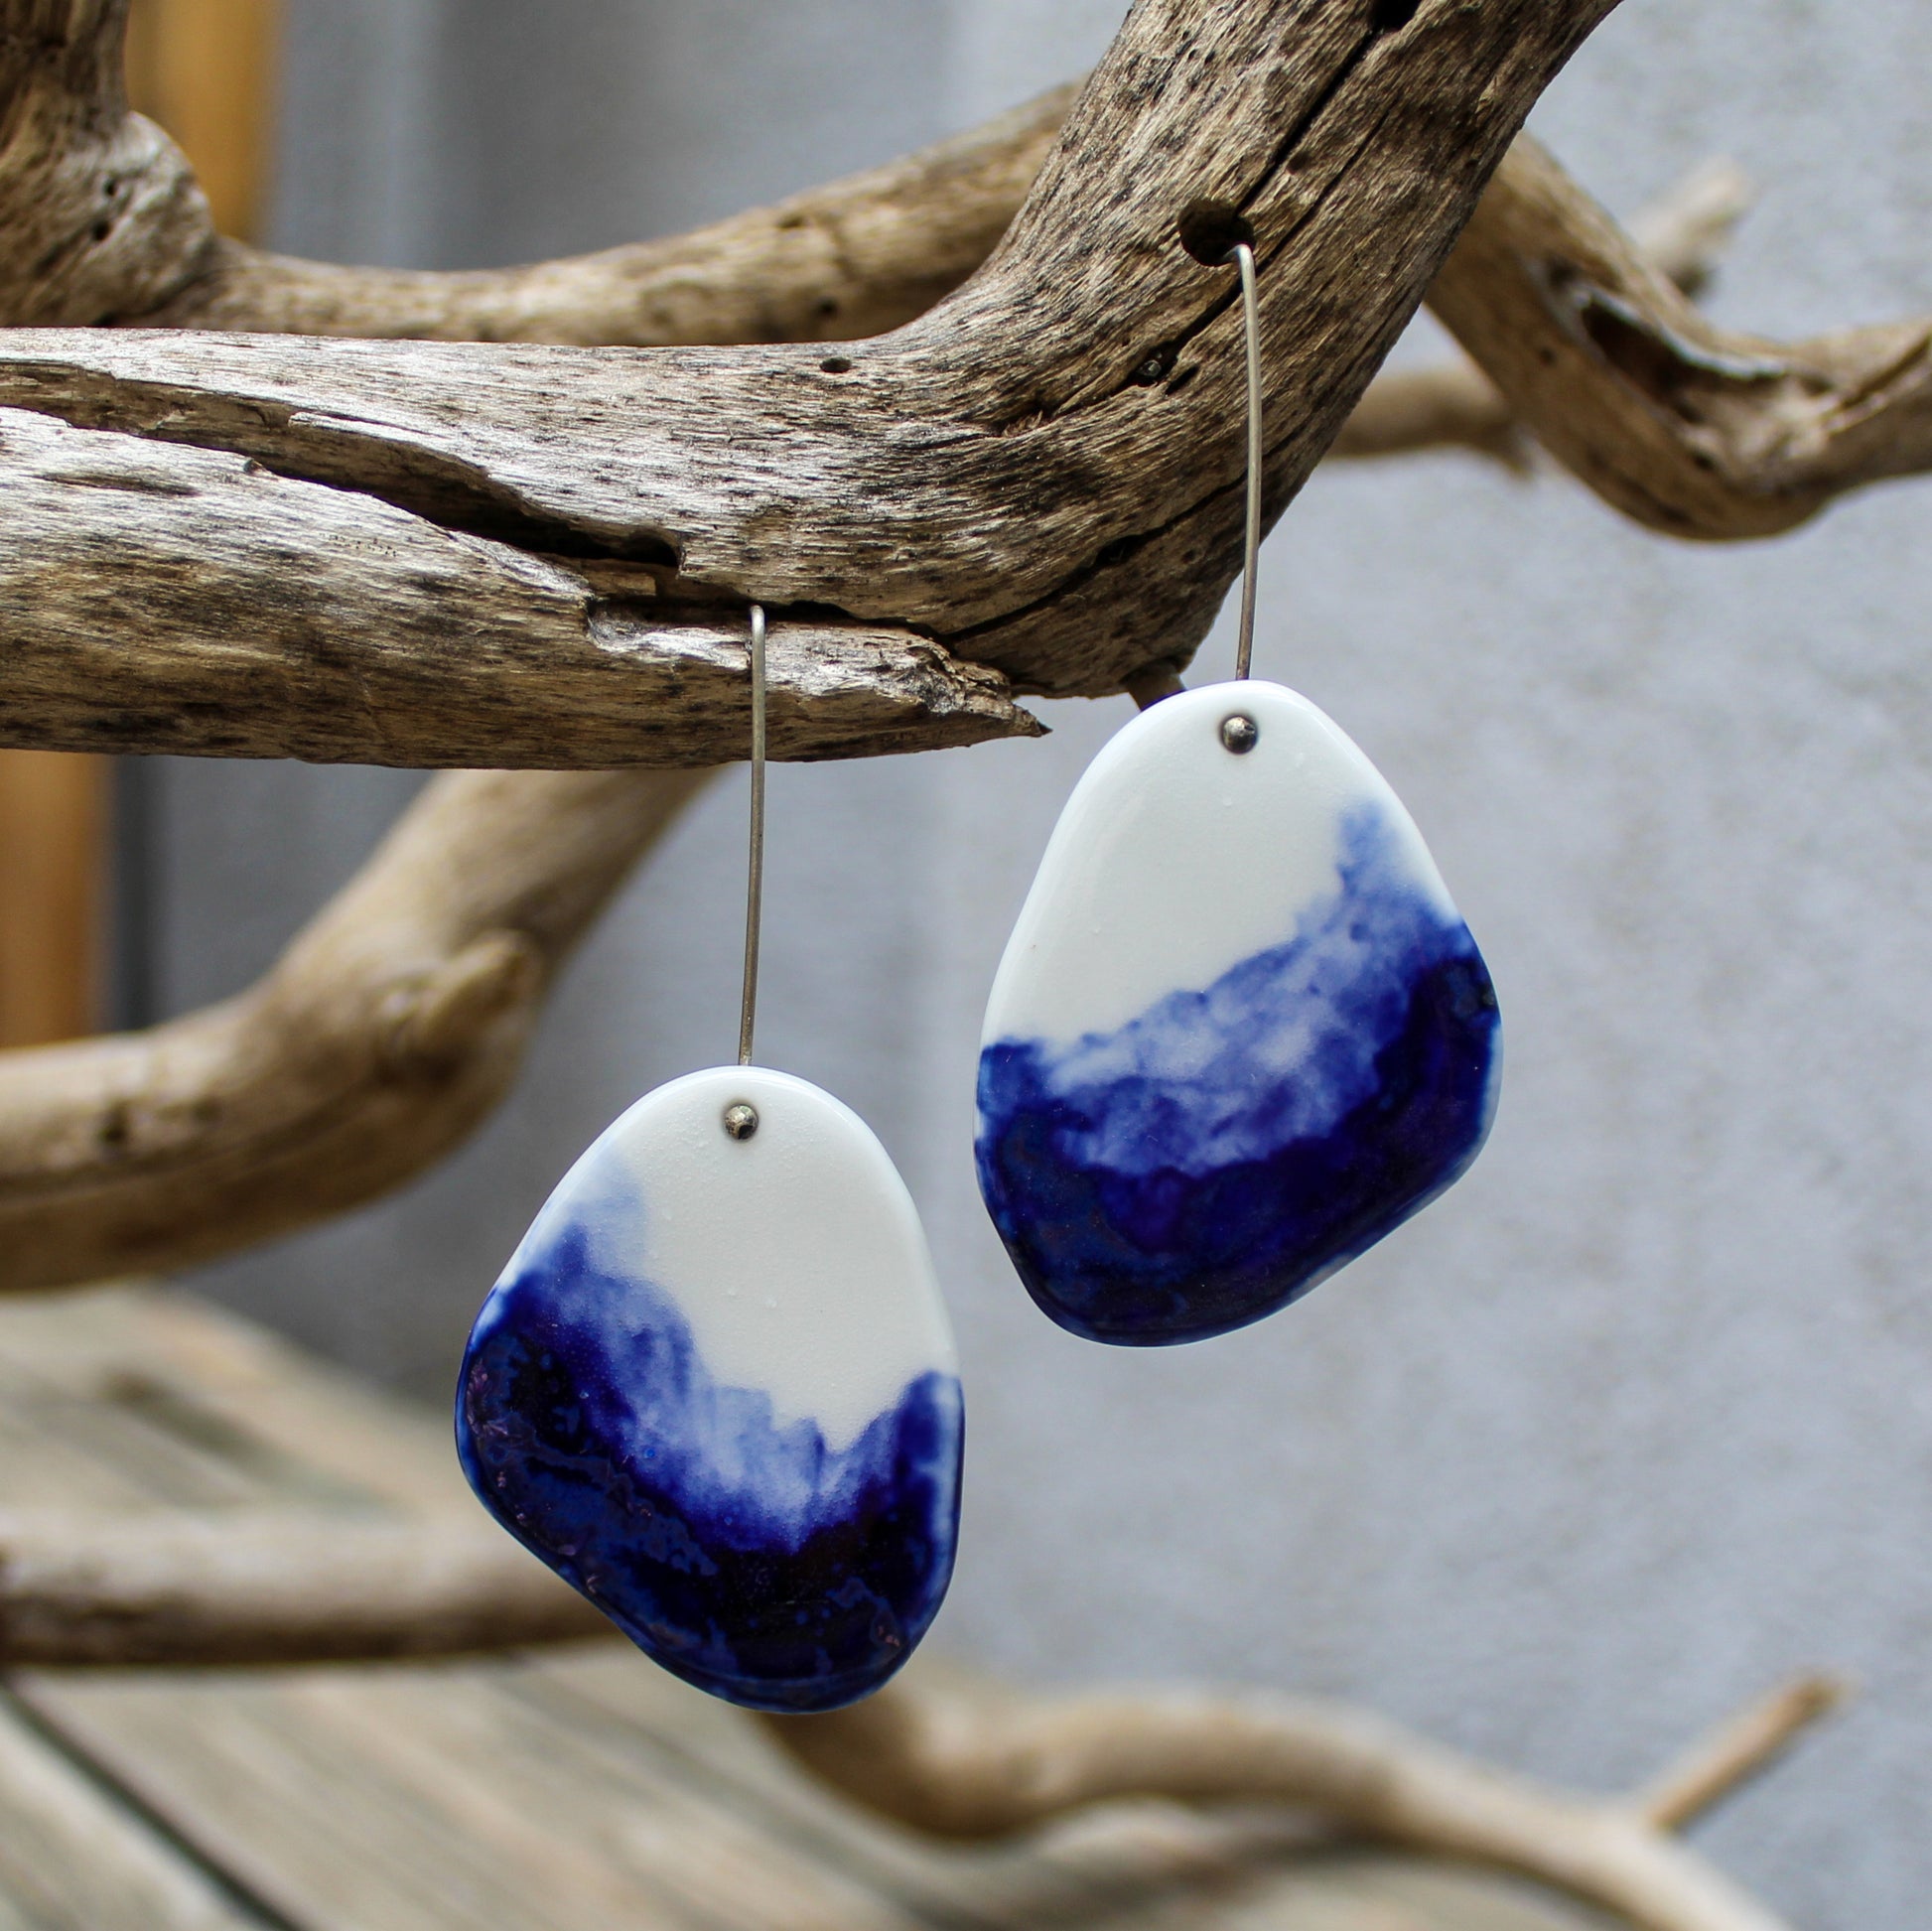 Long dangle earrings from white porcelain, hand painted with blue oxide. They hang from handmade oxidized sterling silver ear wire.